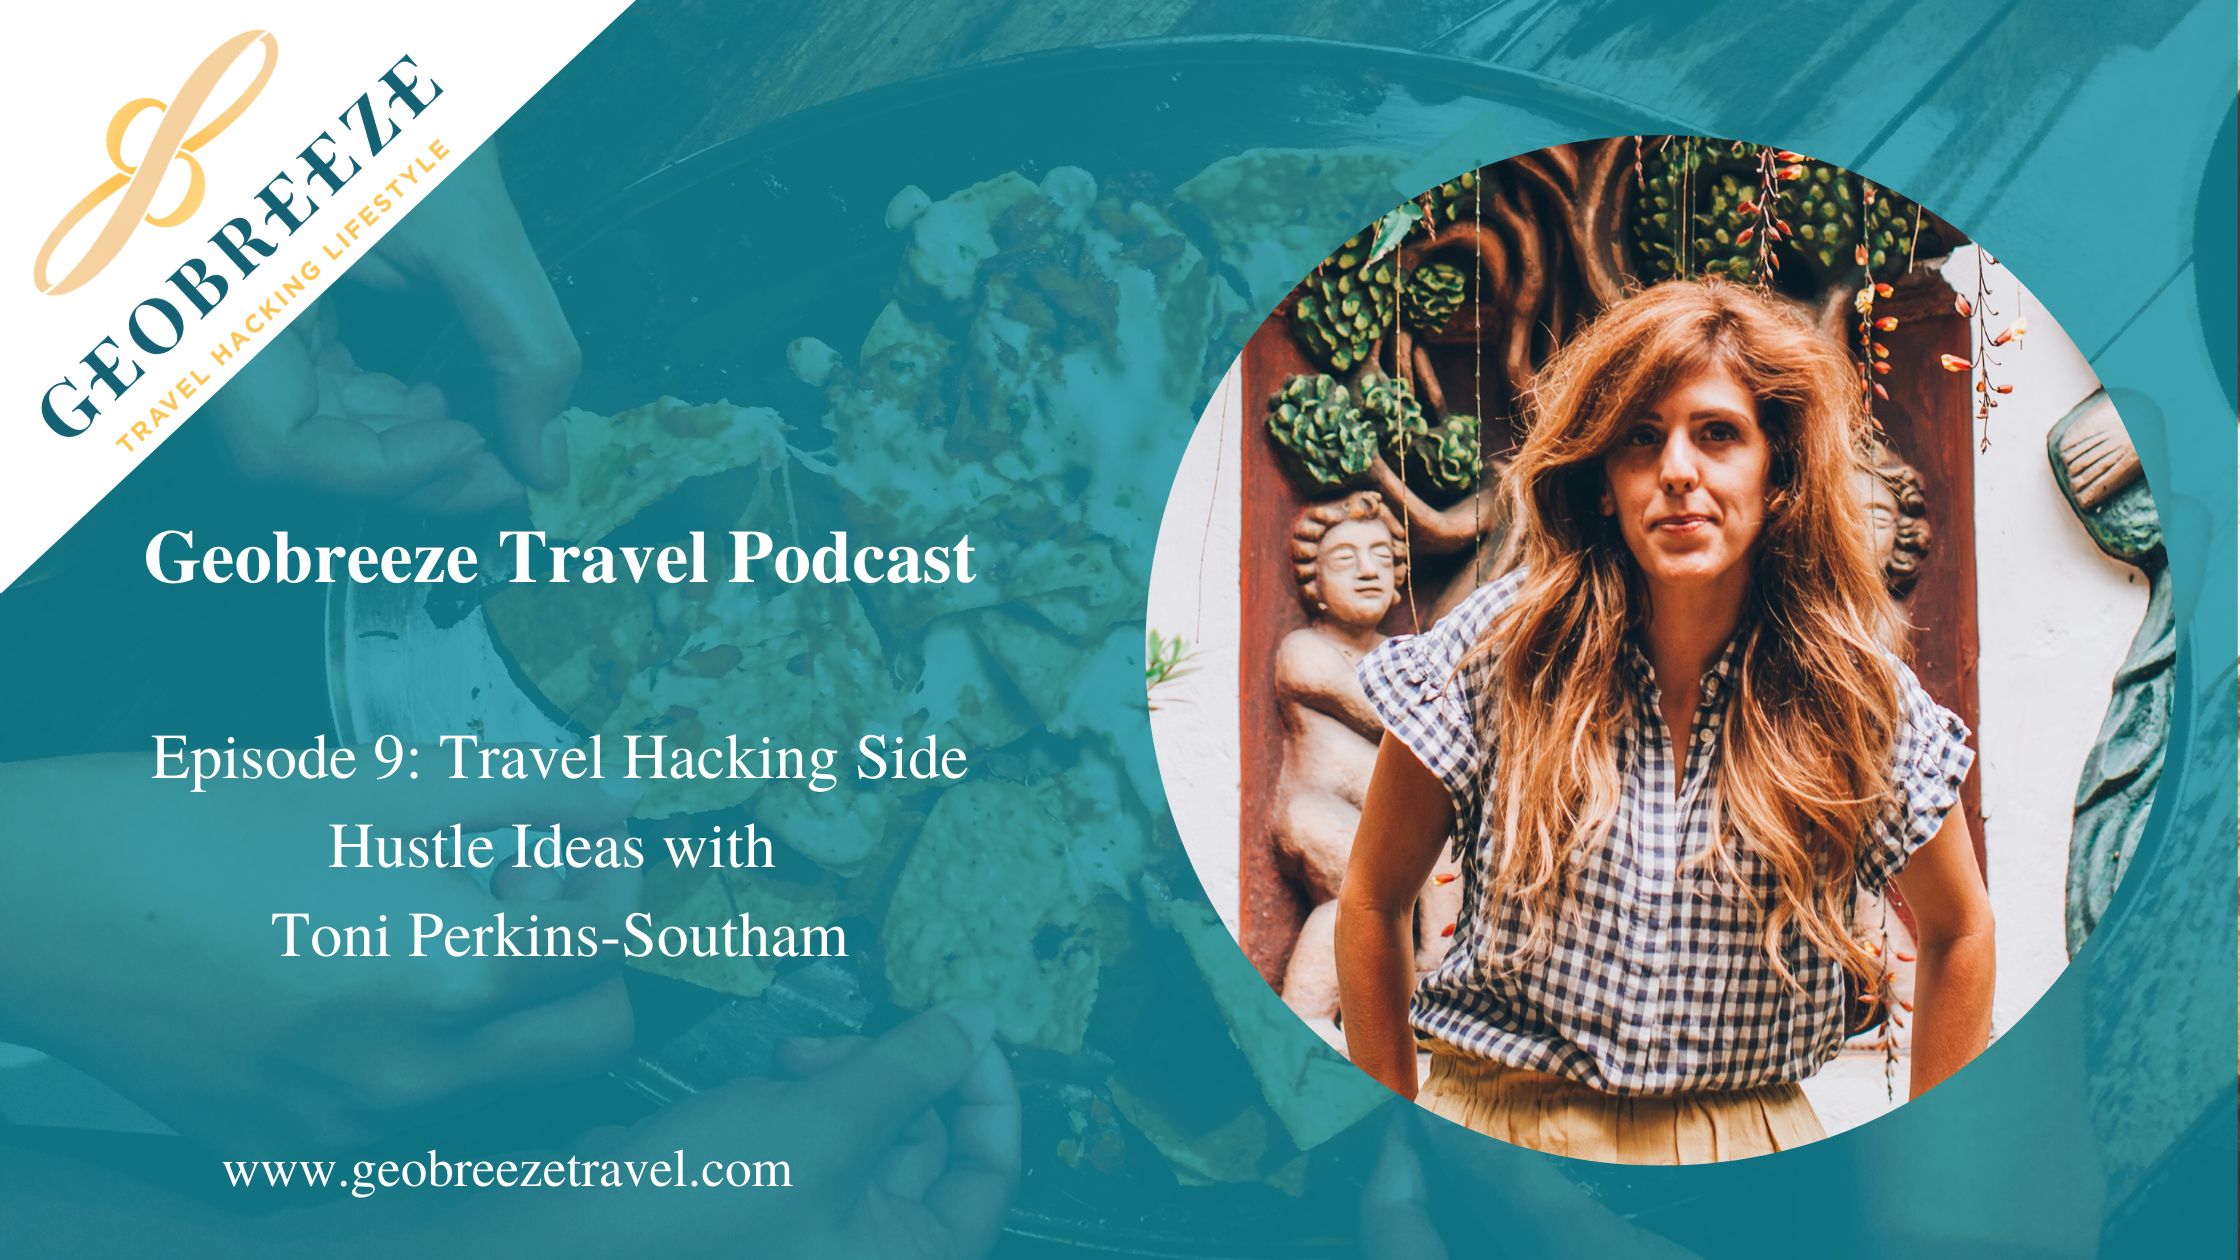 Episode 9: Travel Hacking Side Hustle Ideas with Toni Perkins-Southam